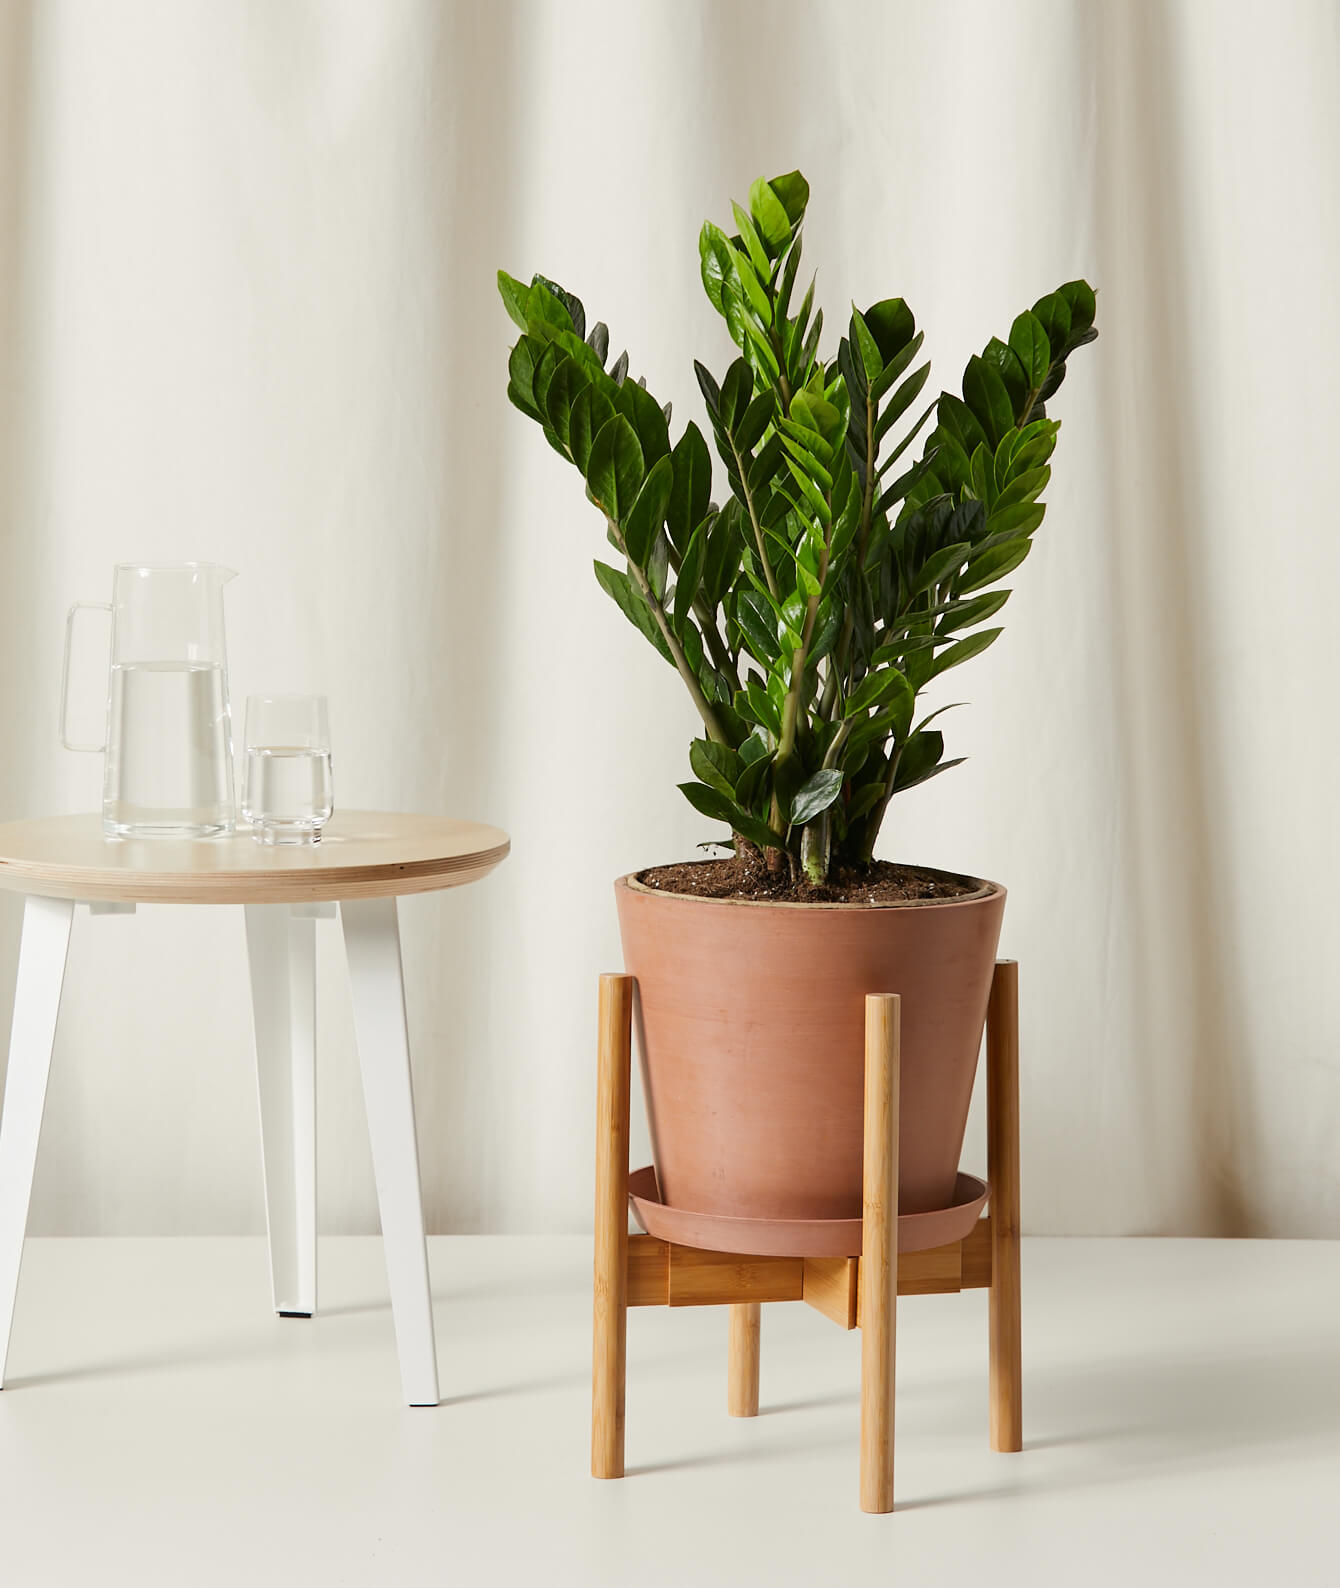 https://bloomscape.com/wp-content/uploads/2021/07/bloomscape_adjustable-plant-stand_bamboo_withplant.jpeg?ver=559523